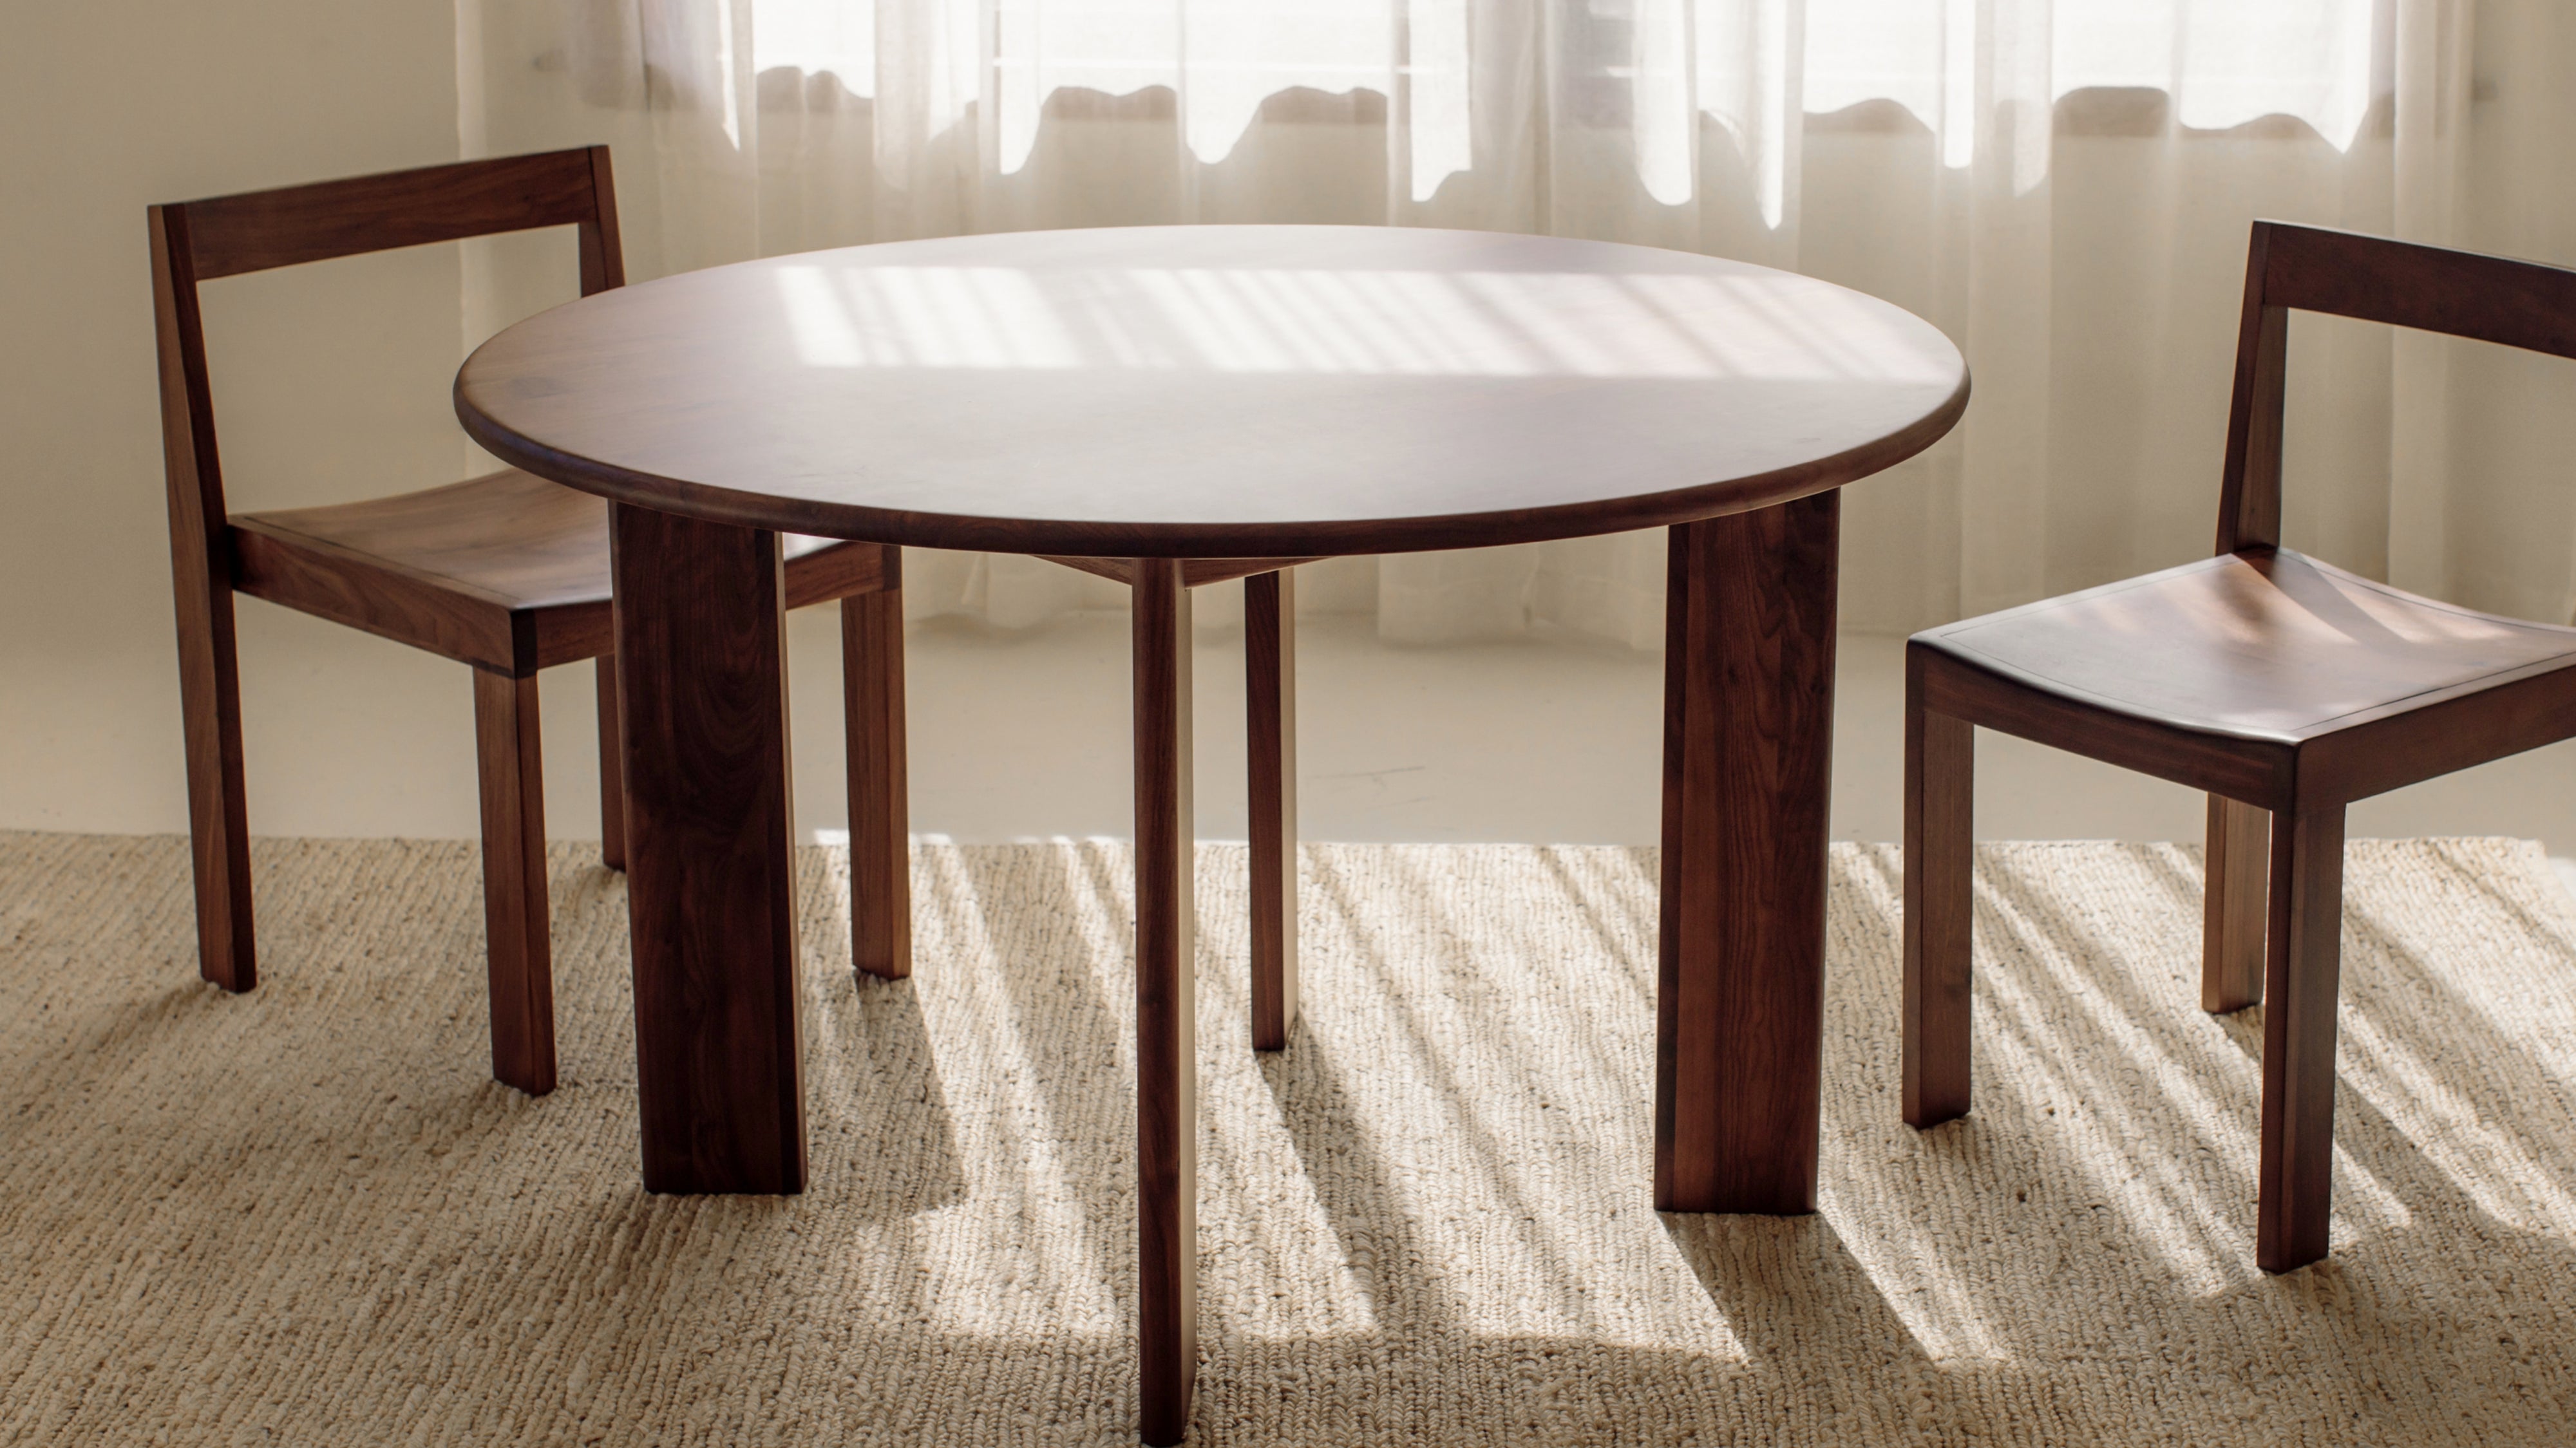 Frame Round Dining Table, Seats 4-5 People, American Walnut - Image 3